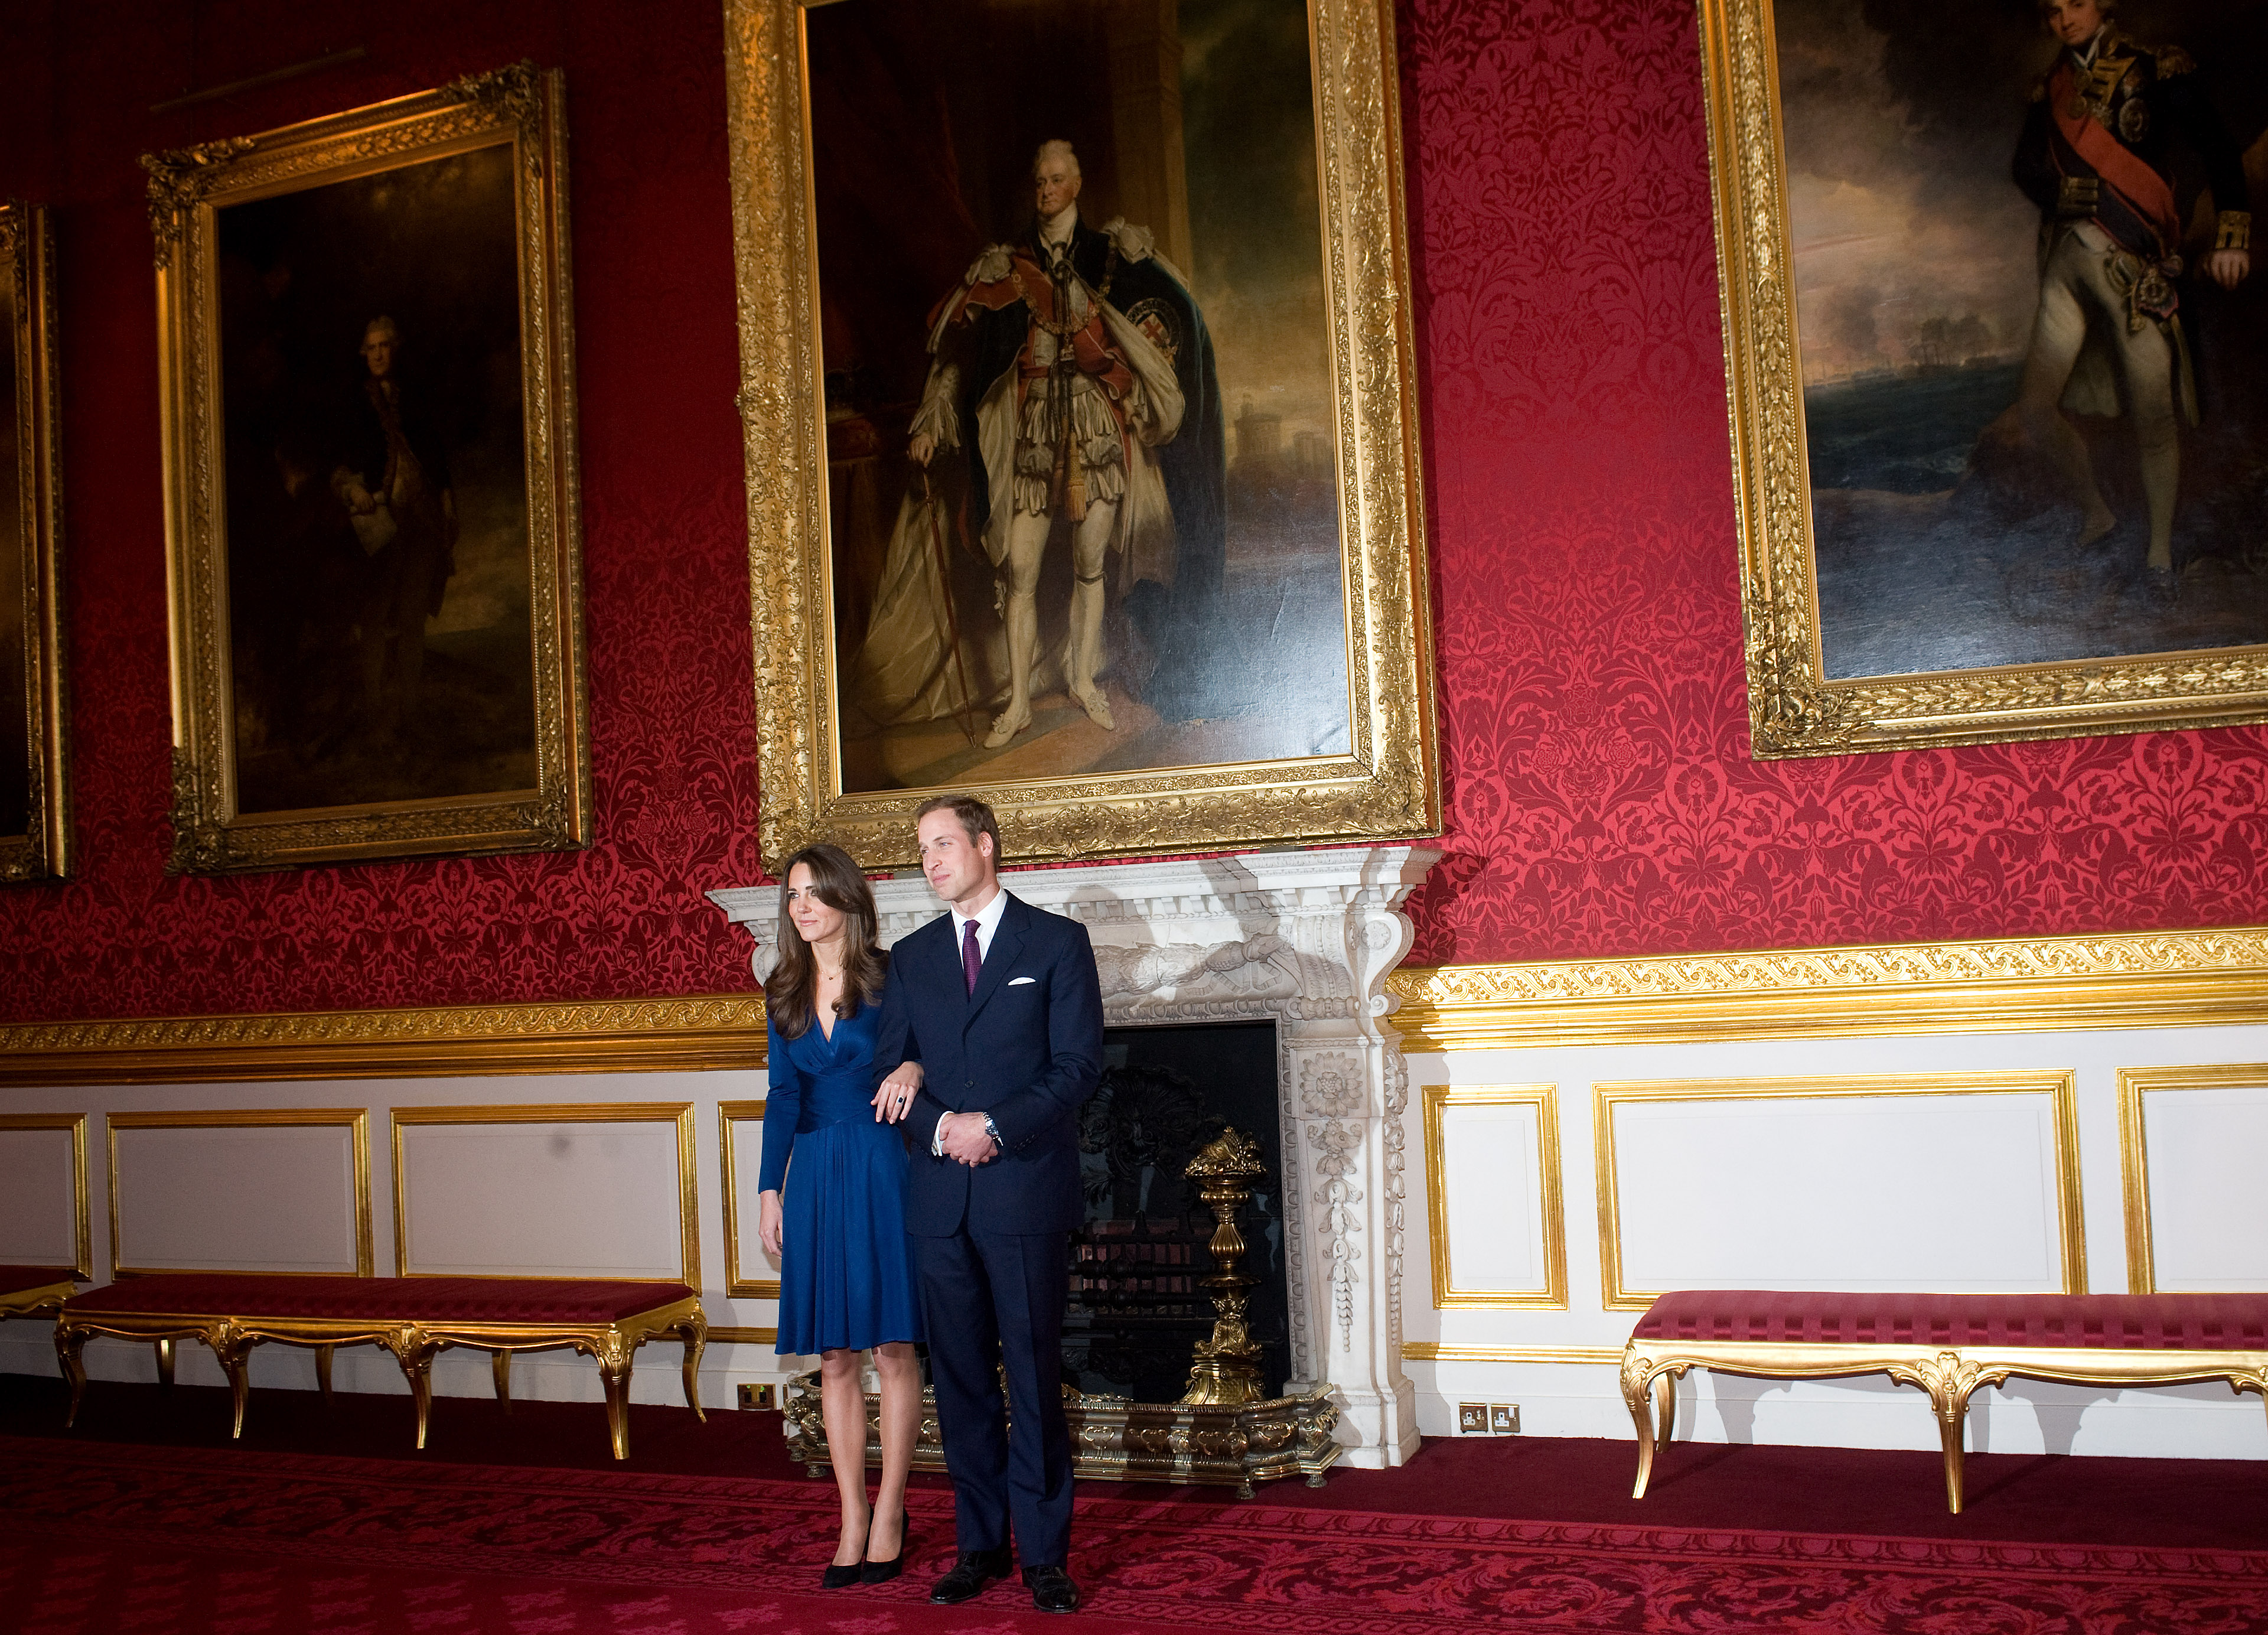 Prince William and Kate Middleton pose for photographs in the State Apartments of St James Palace on November 16, 2010 in London, England. (Samir Hussein—WireImage/Getty Images)